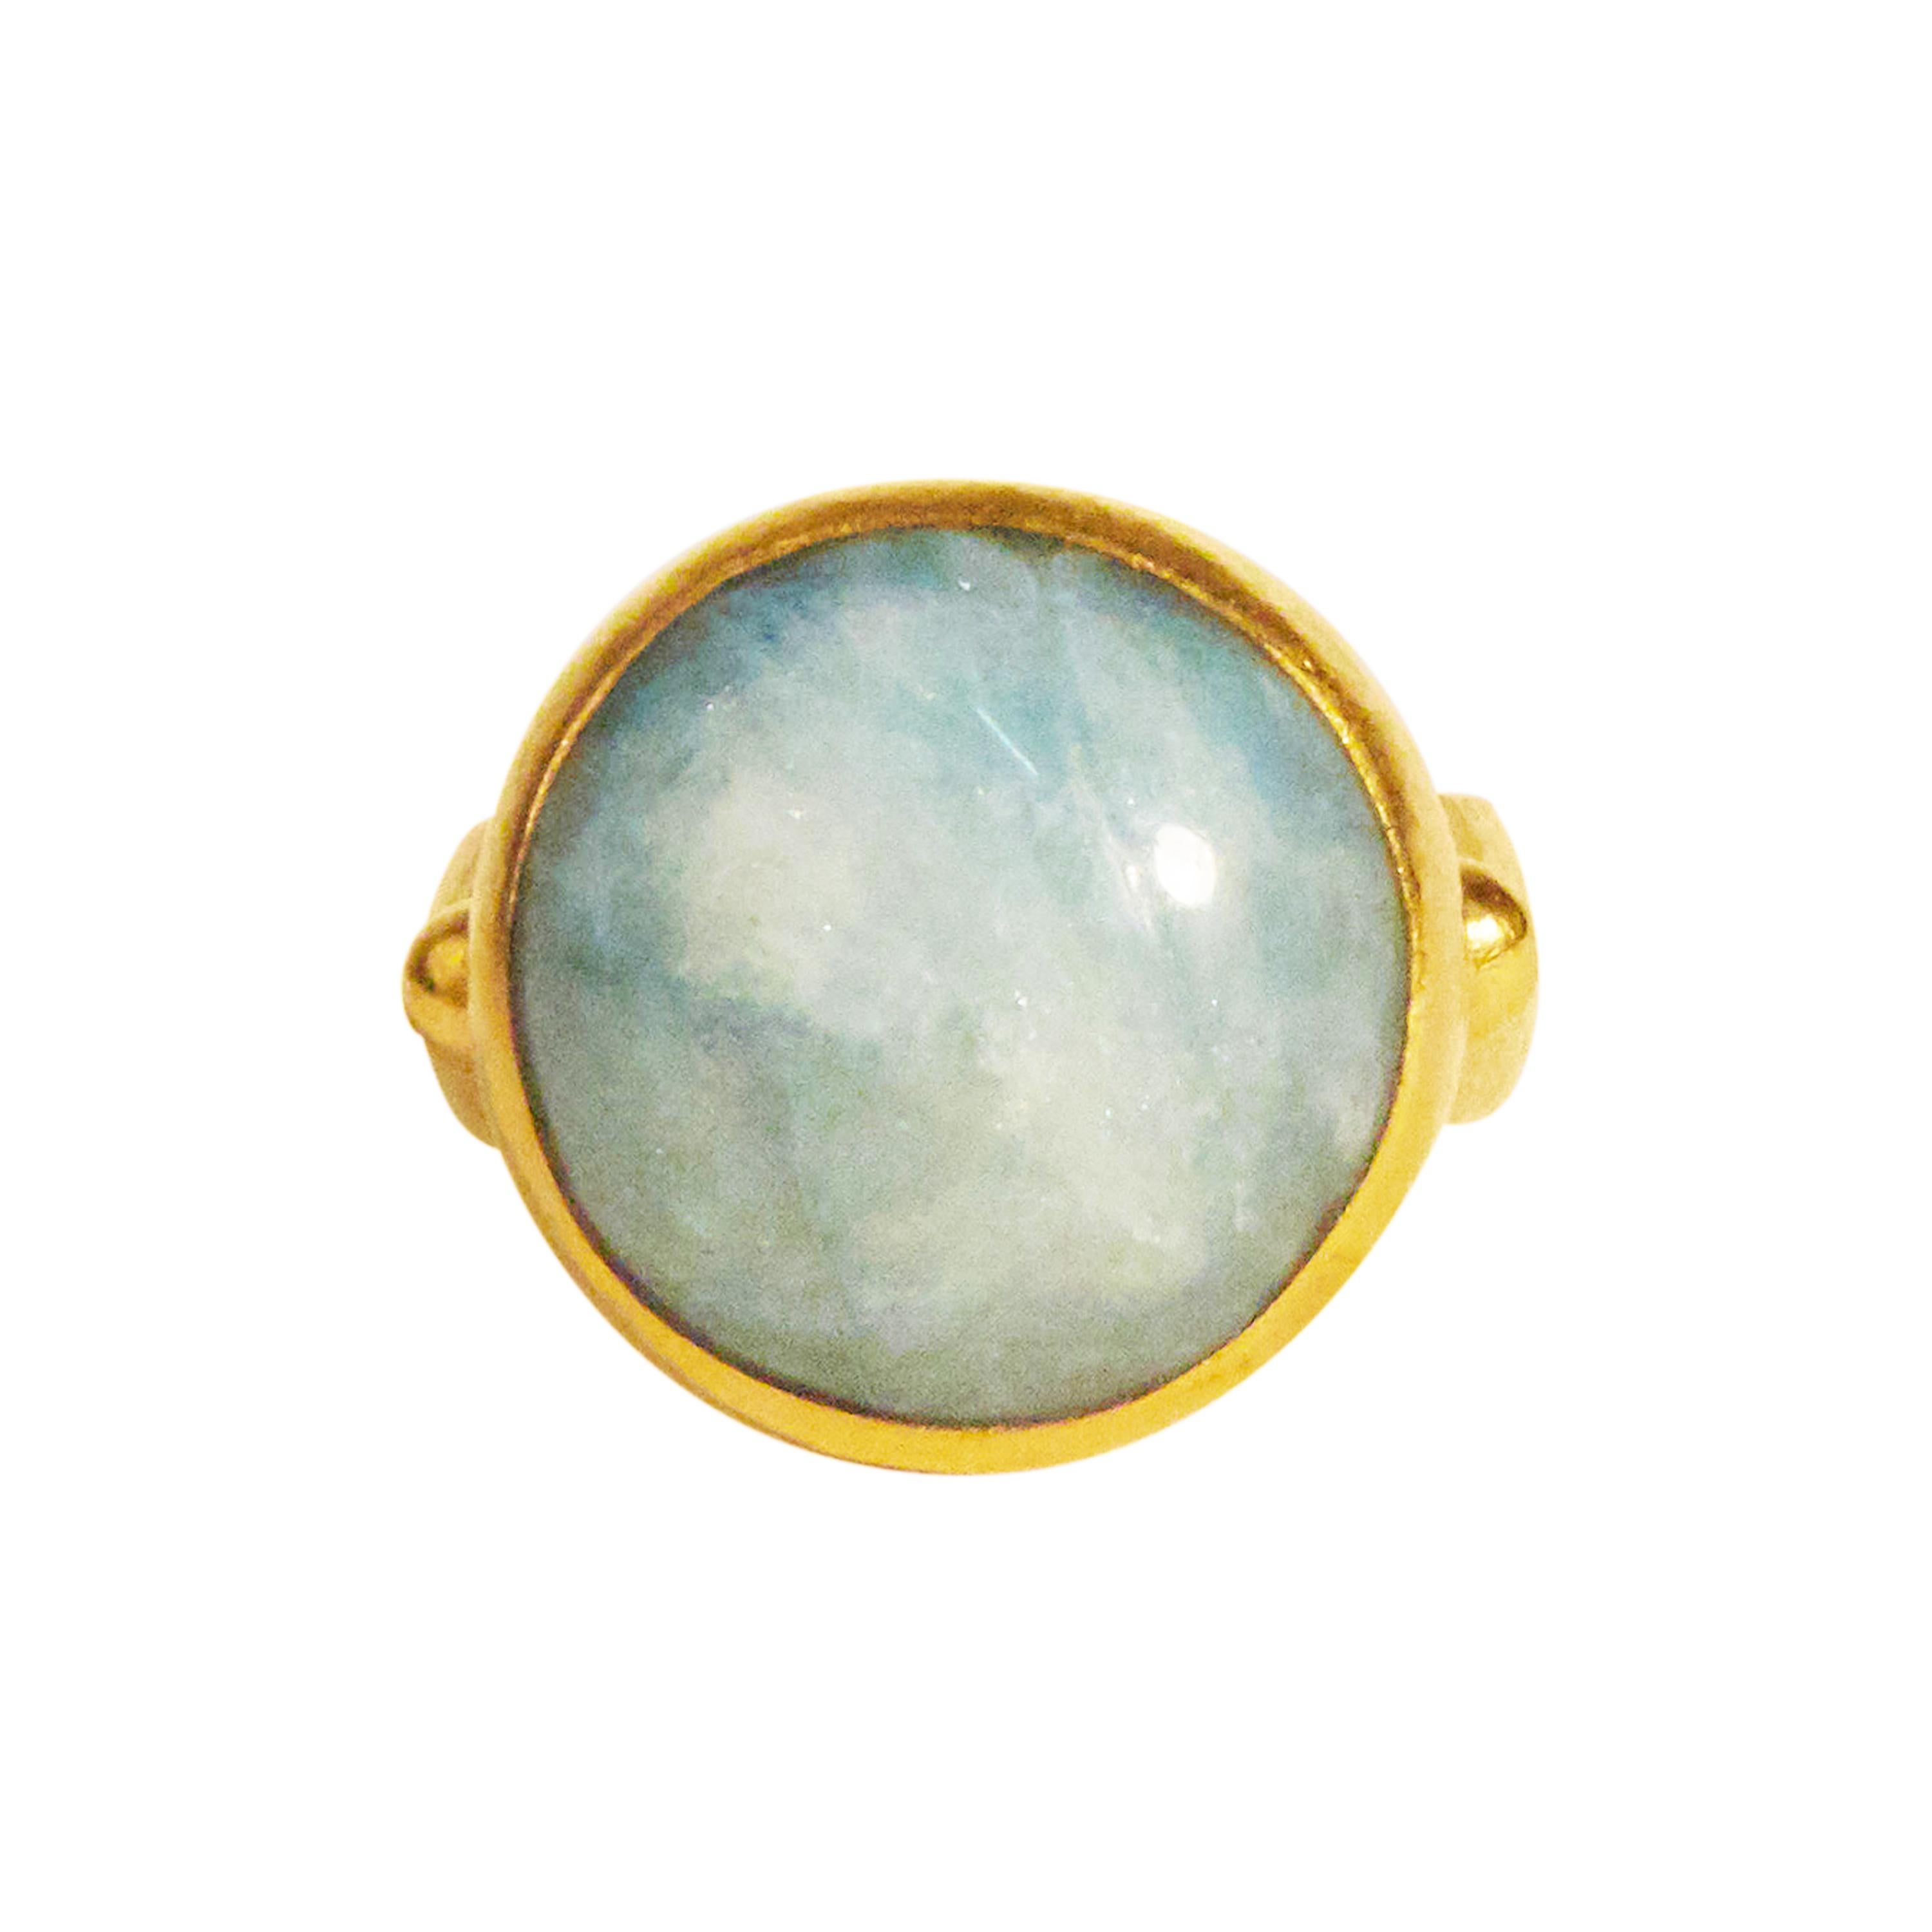 GURHAN one-of-a-kind ring set in 24 Karat hammered yellow gold featuring a 17mm round cabochon Aquamarine, 19.75cts. Bezel stone setting, 22 Karat hammered yellow gold shank with side granulations, size 6.5.